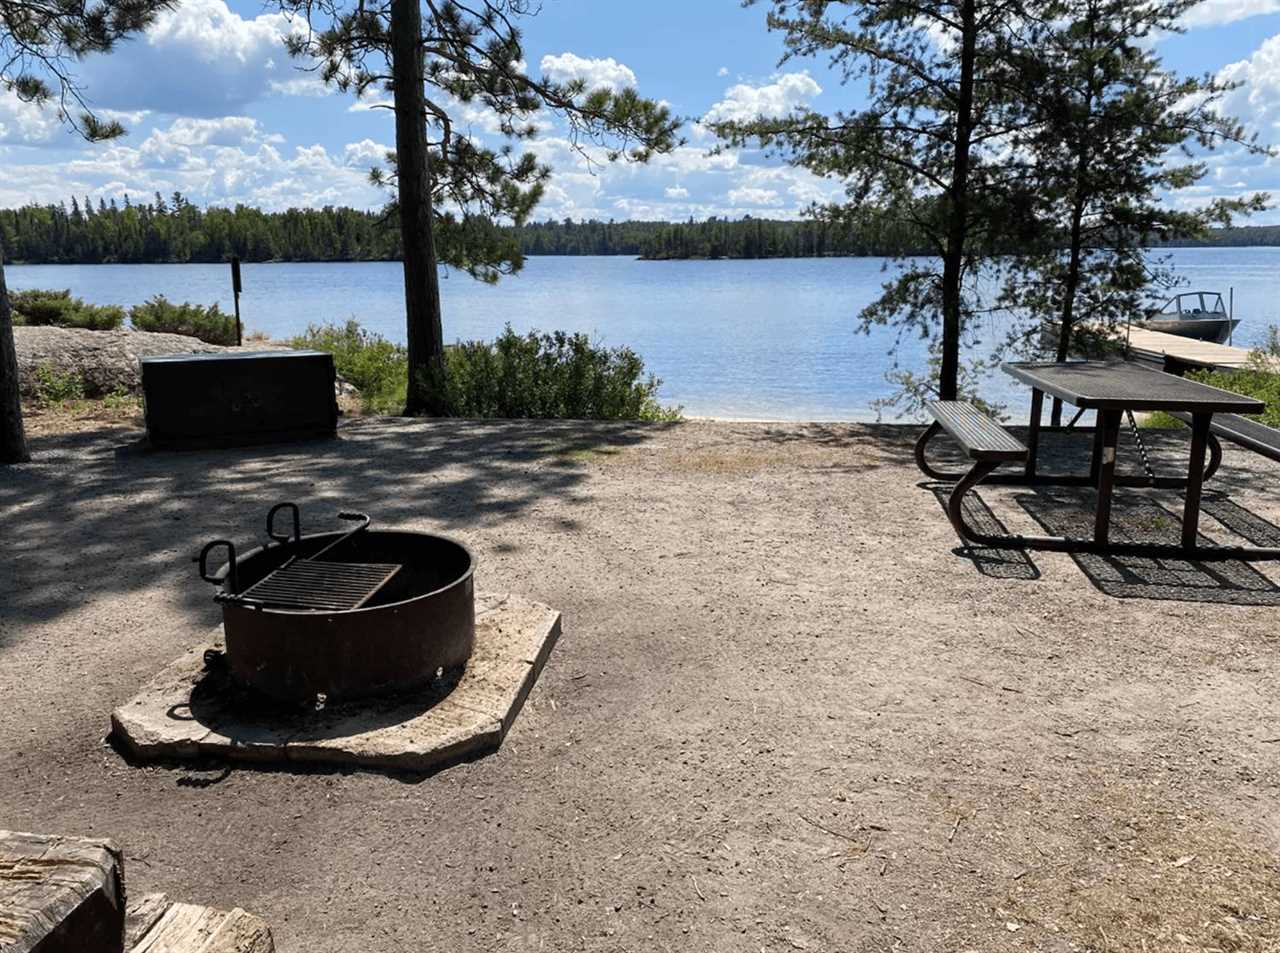 where-to-stay-guide-to-rving-voyageurs-national-park-01-2023 